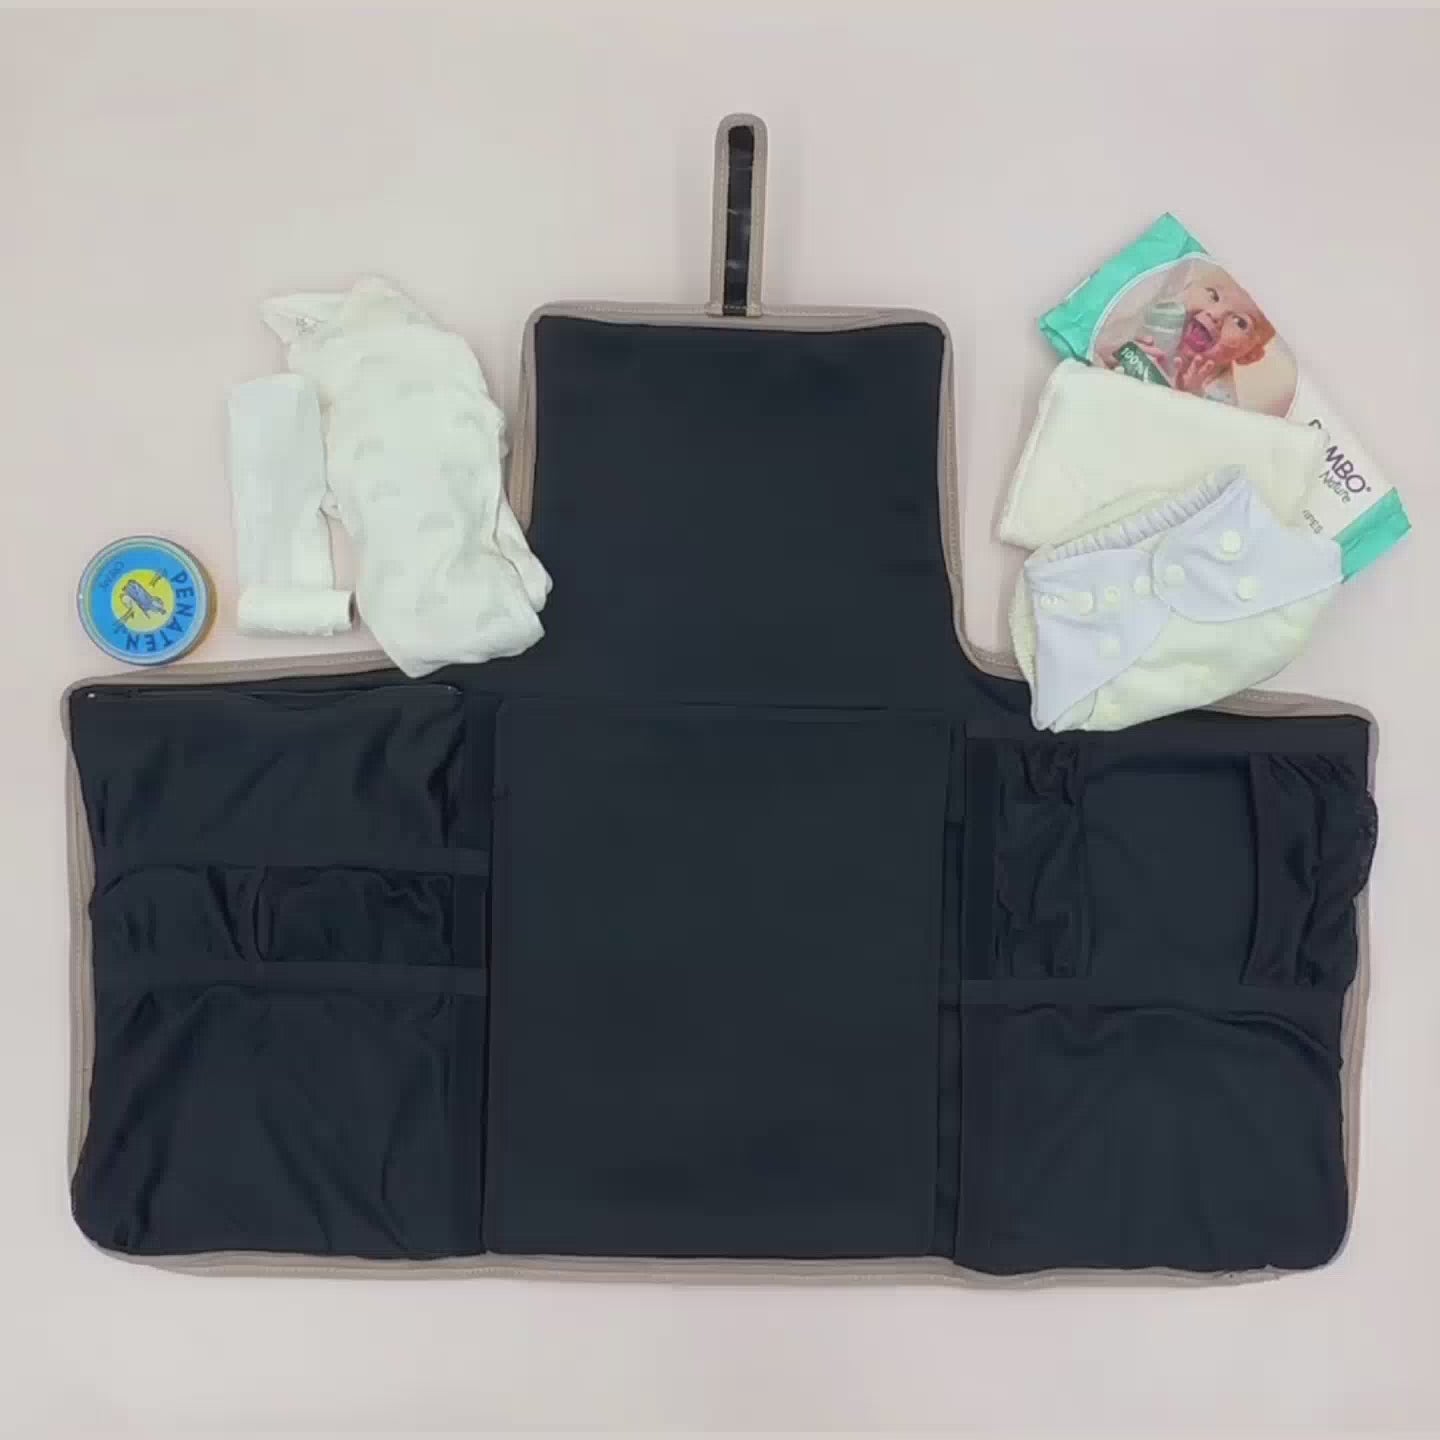 How the Coco Alexander Diaper Bag works